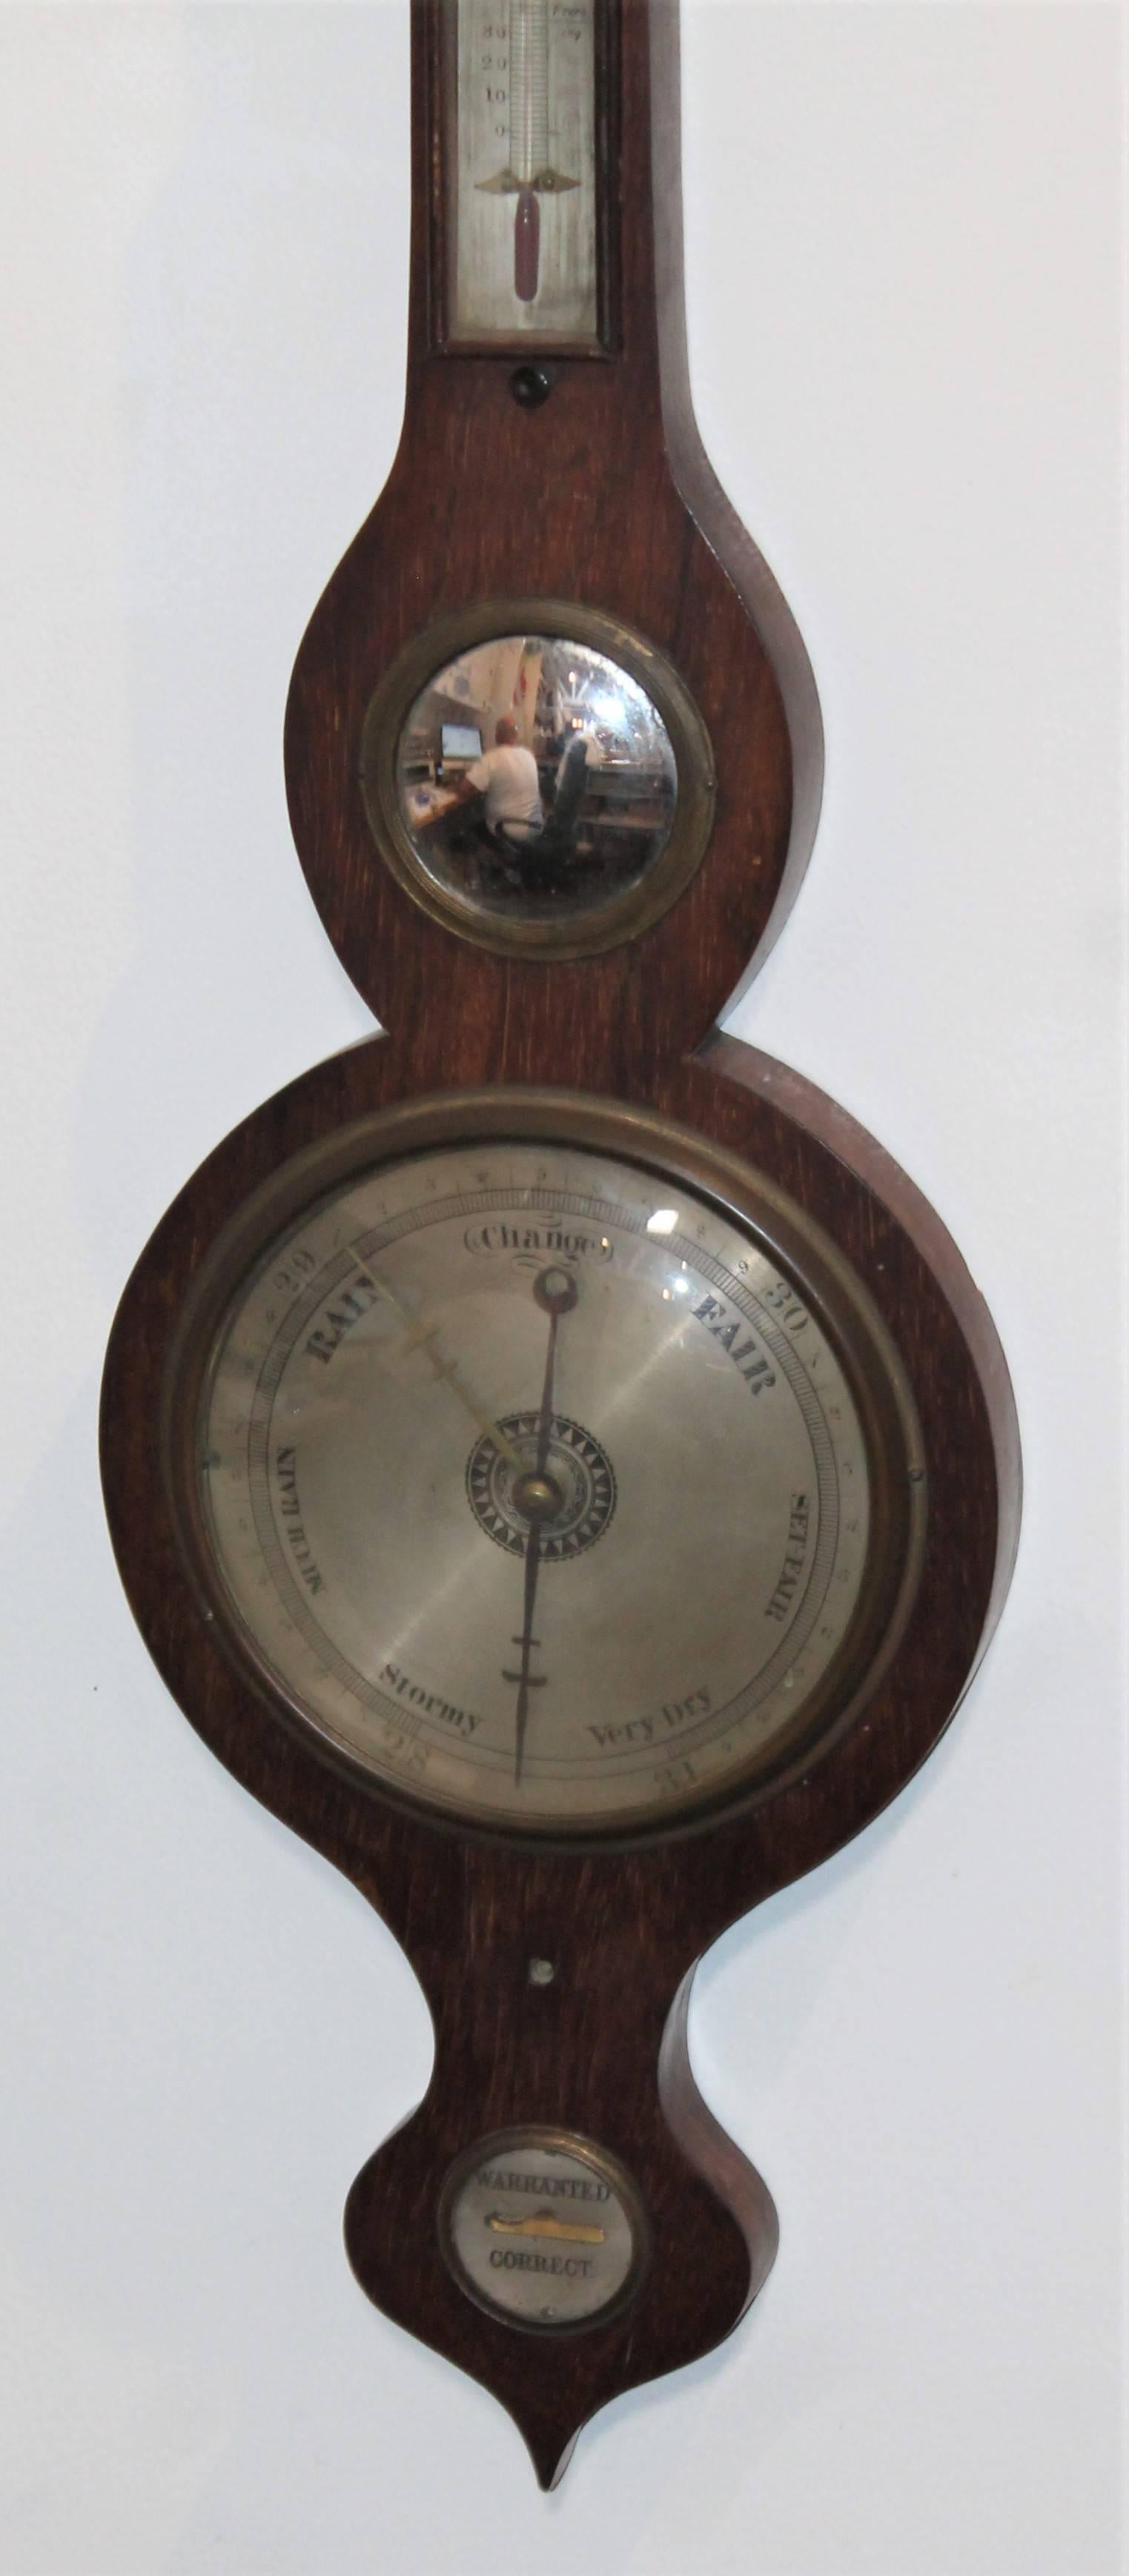 Wheel or banjo barometer. Original mercury glass mirror. All original, small glass shell is missing from the top.